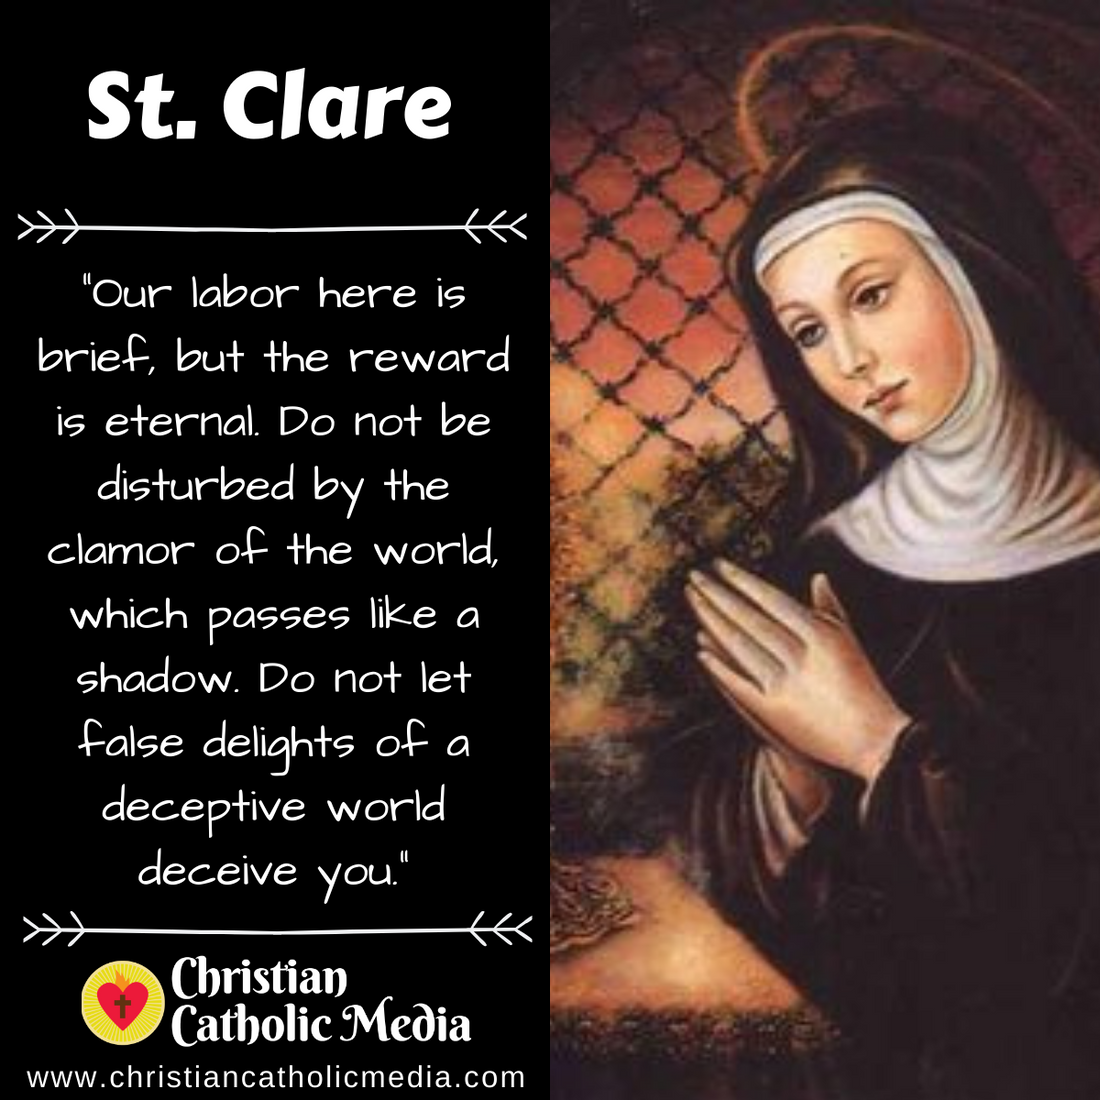 St. Clare - Wednesday August 11, 2021